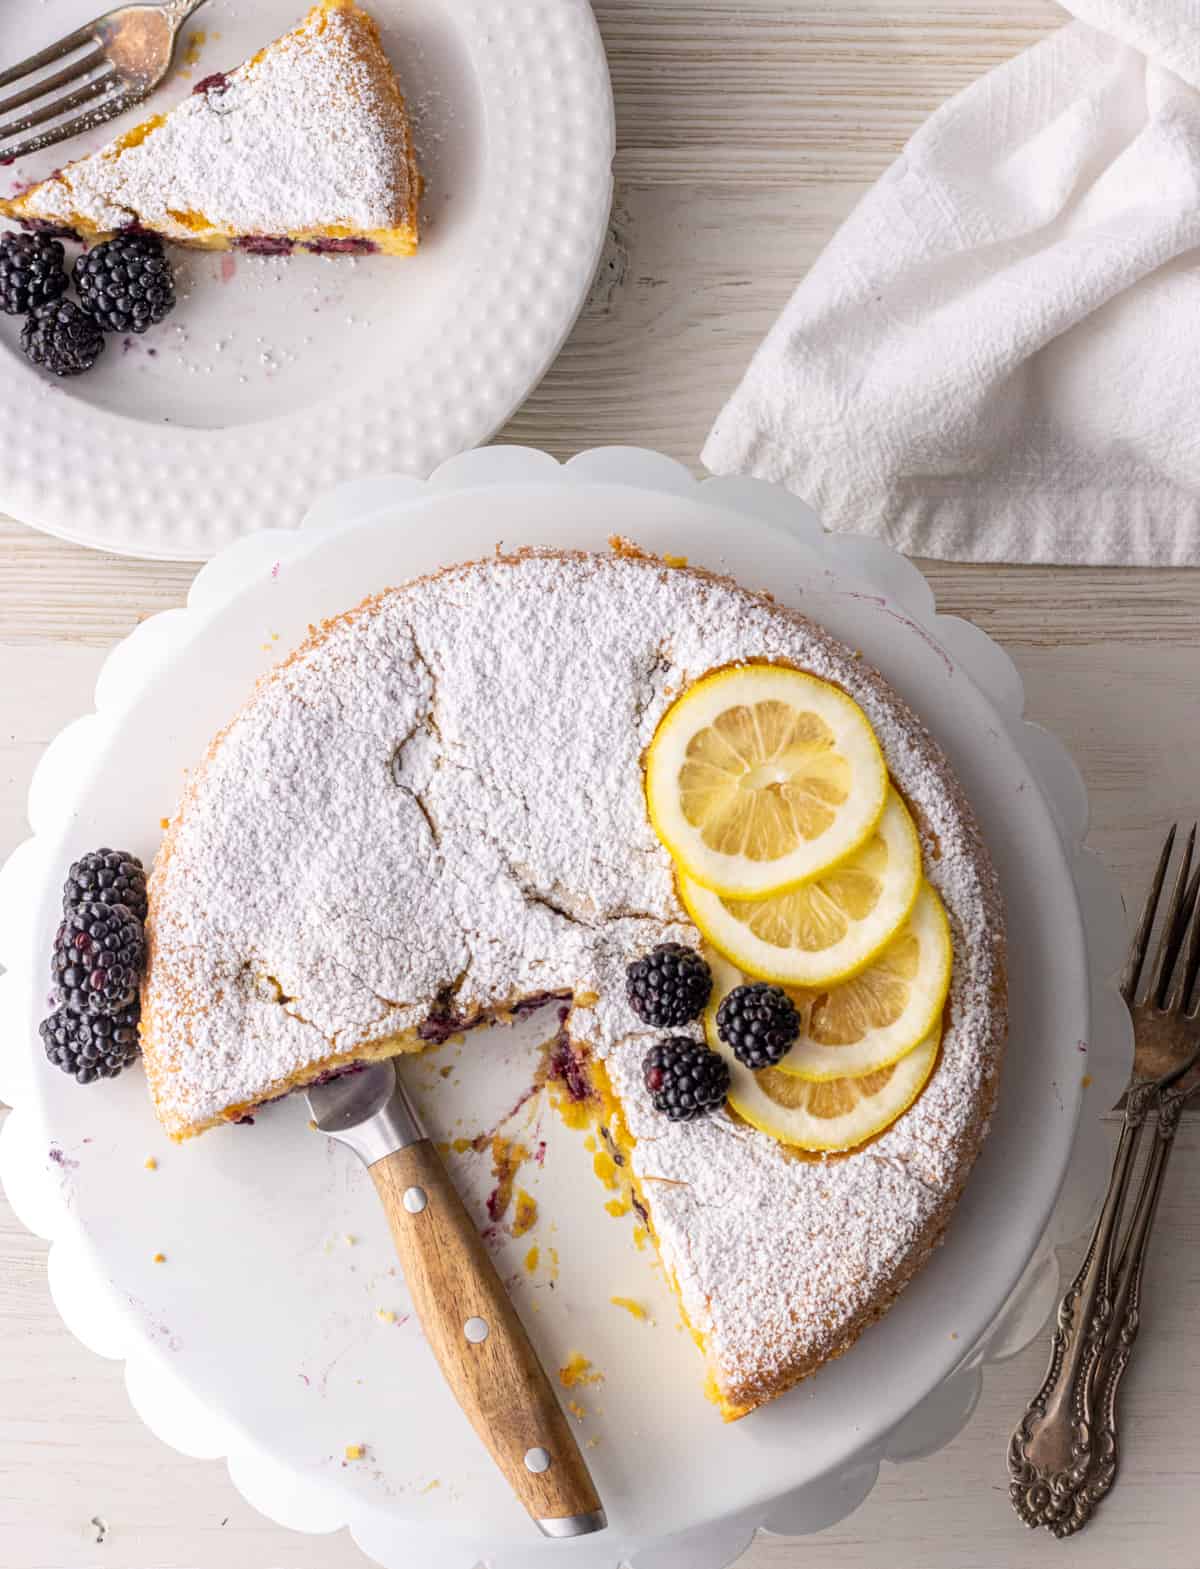 Blackberry almond cake on a cake stand with a knife and a slice on a place to the side.